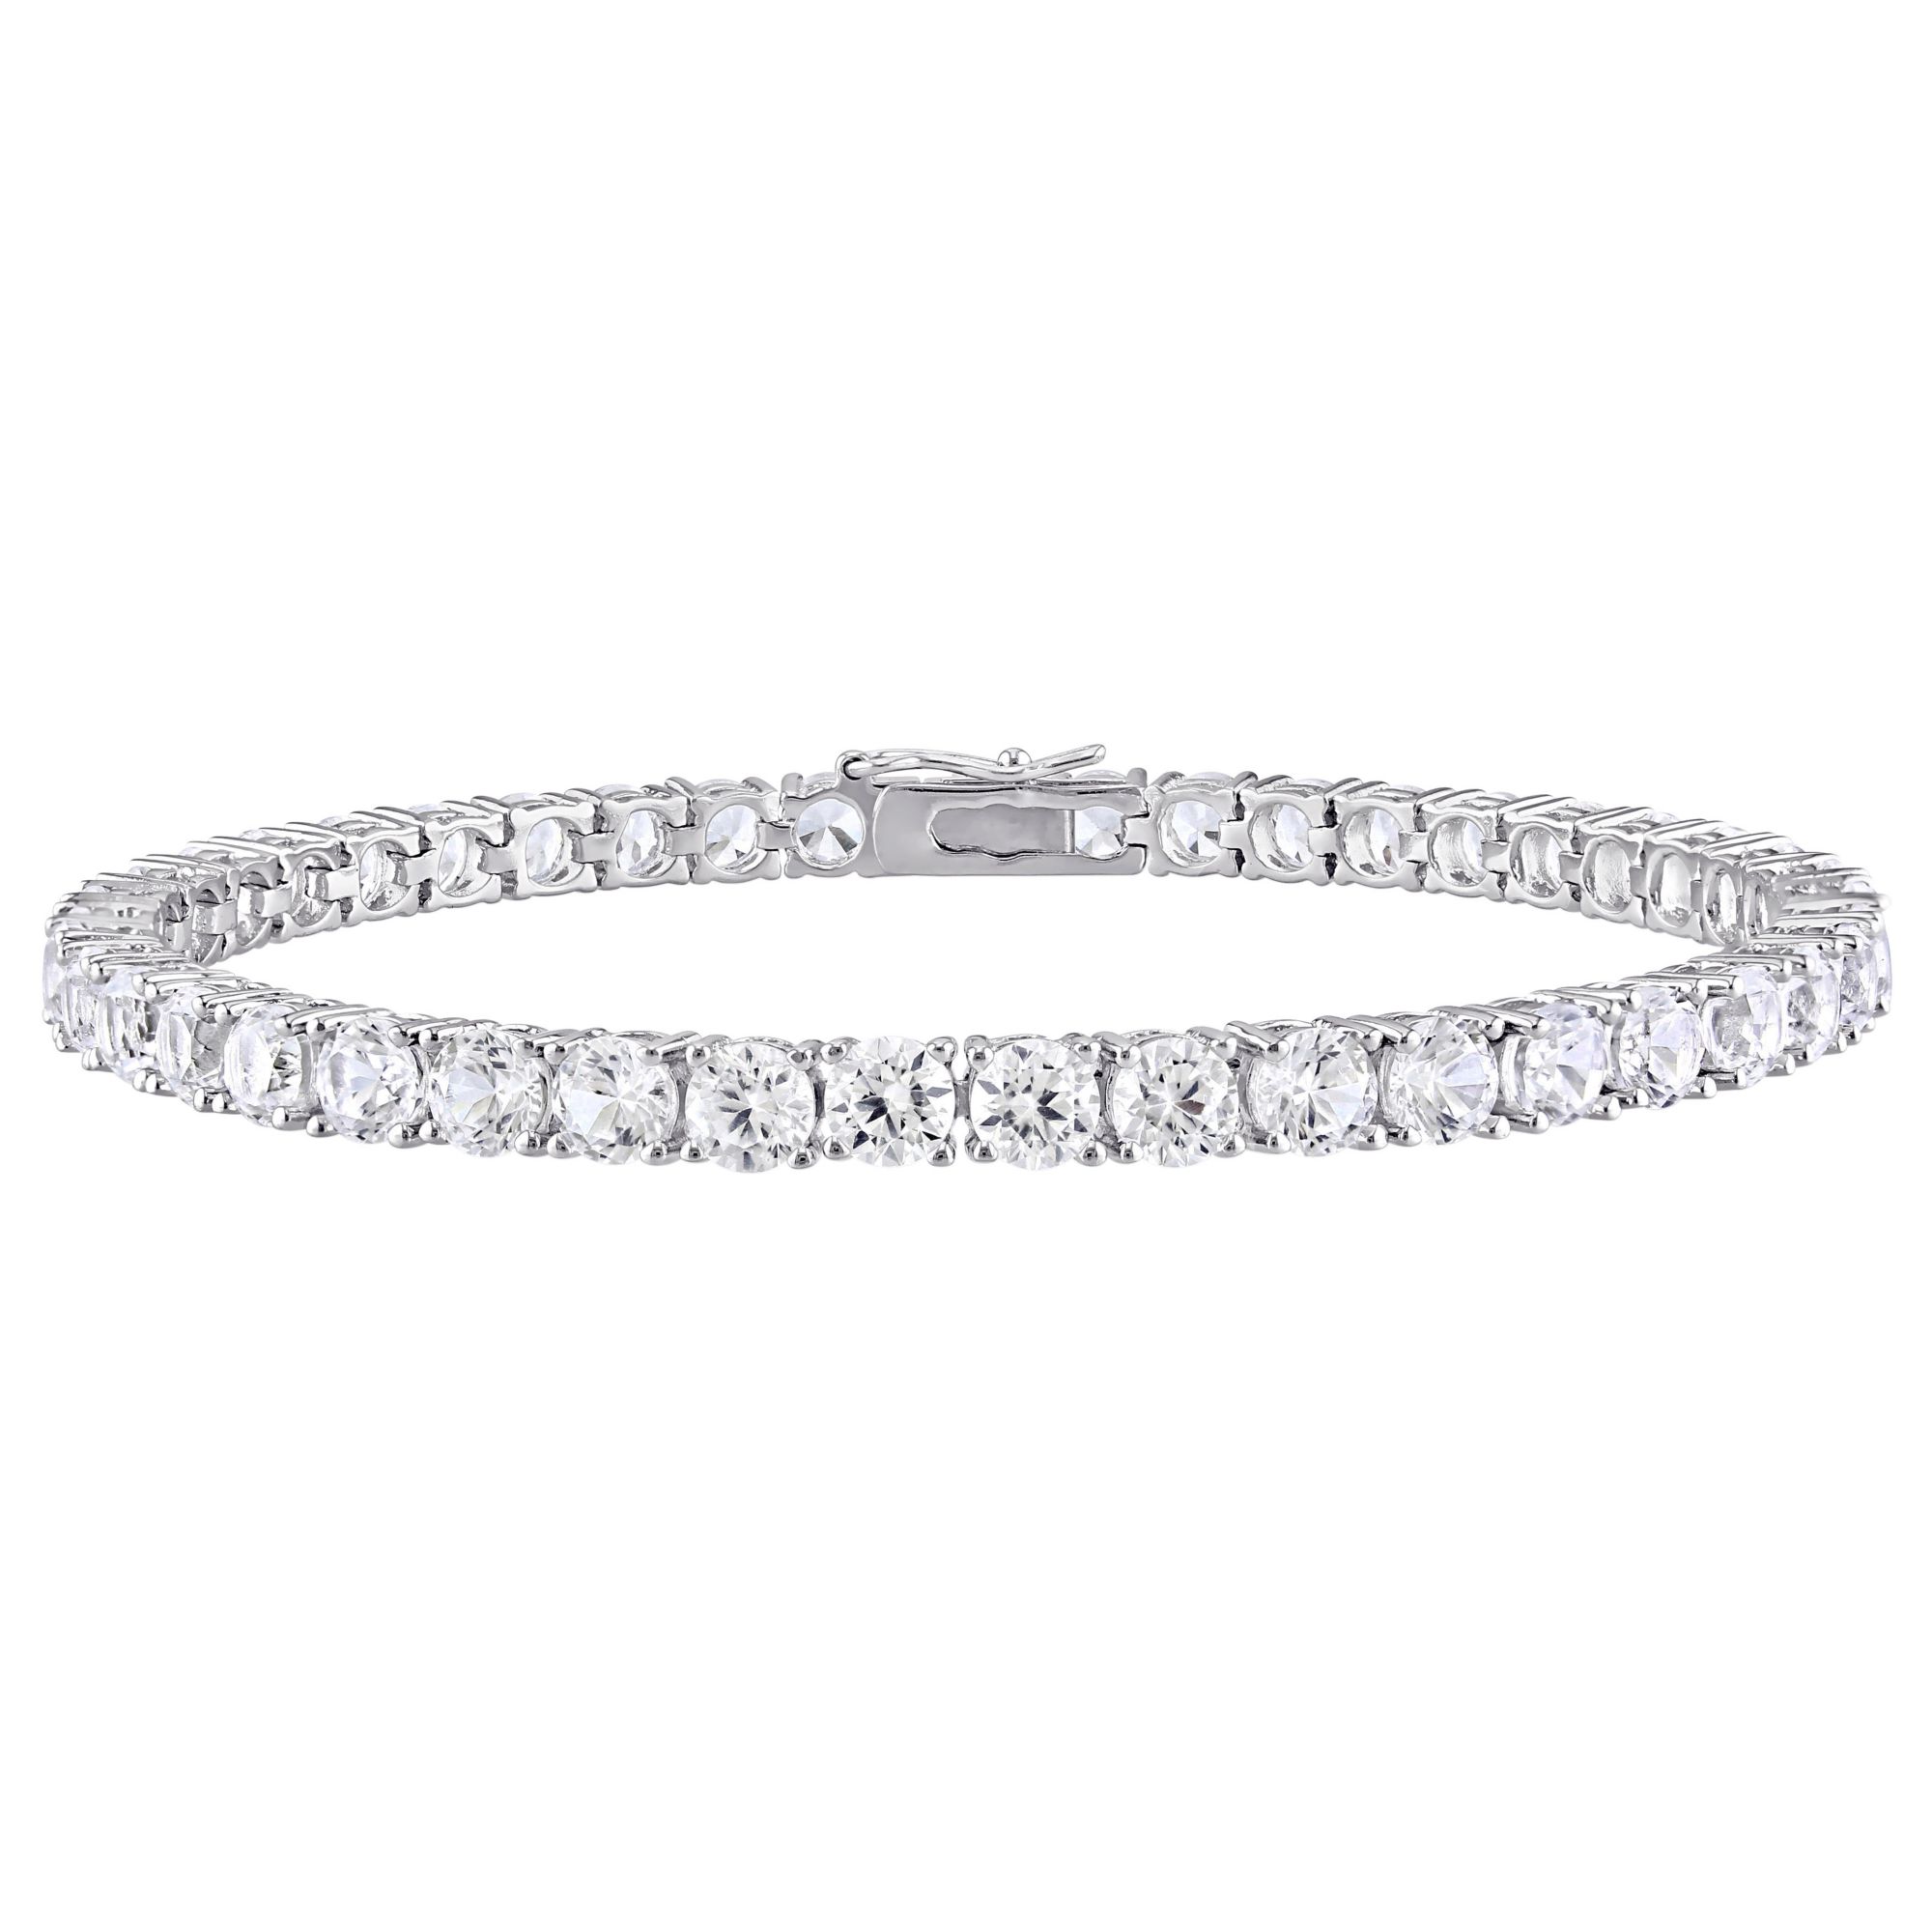 14.25 ct. t.g.w. Created White Sapphire Tennis Bracelet in Sterling Silver